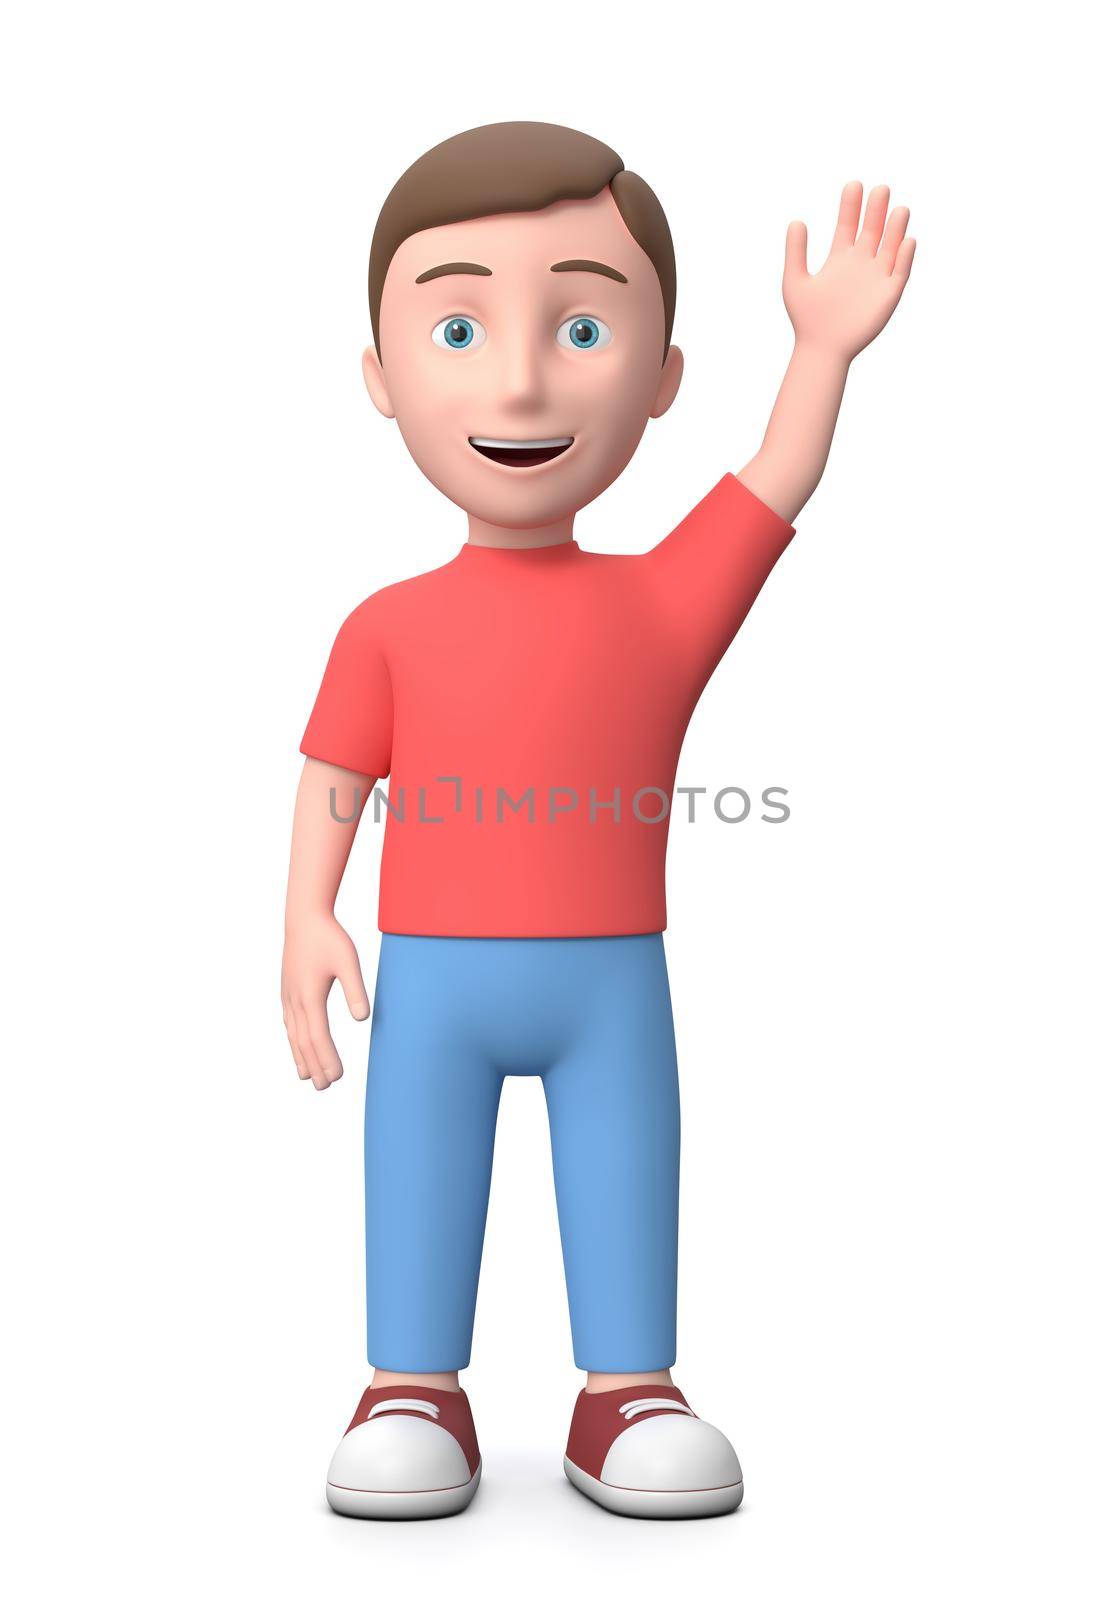 Standing Smiling Young Kid Waving, Saying Hello with Hand. 3D Cartoon Character Isolated on White Background 3D Illustration